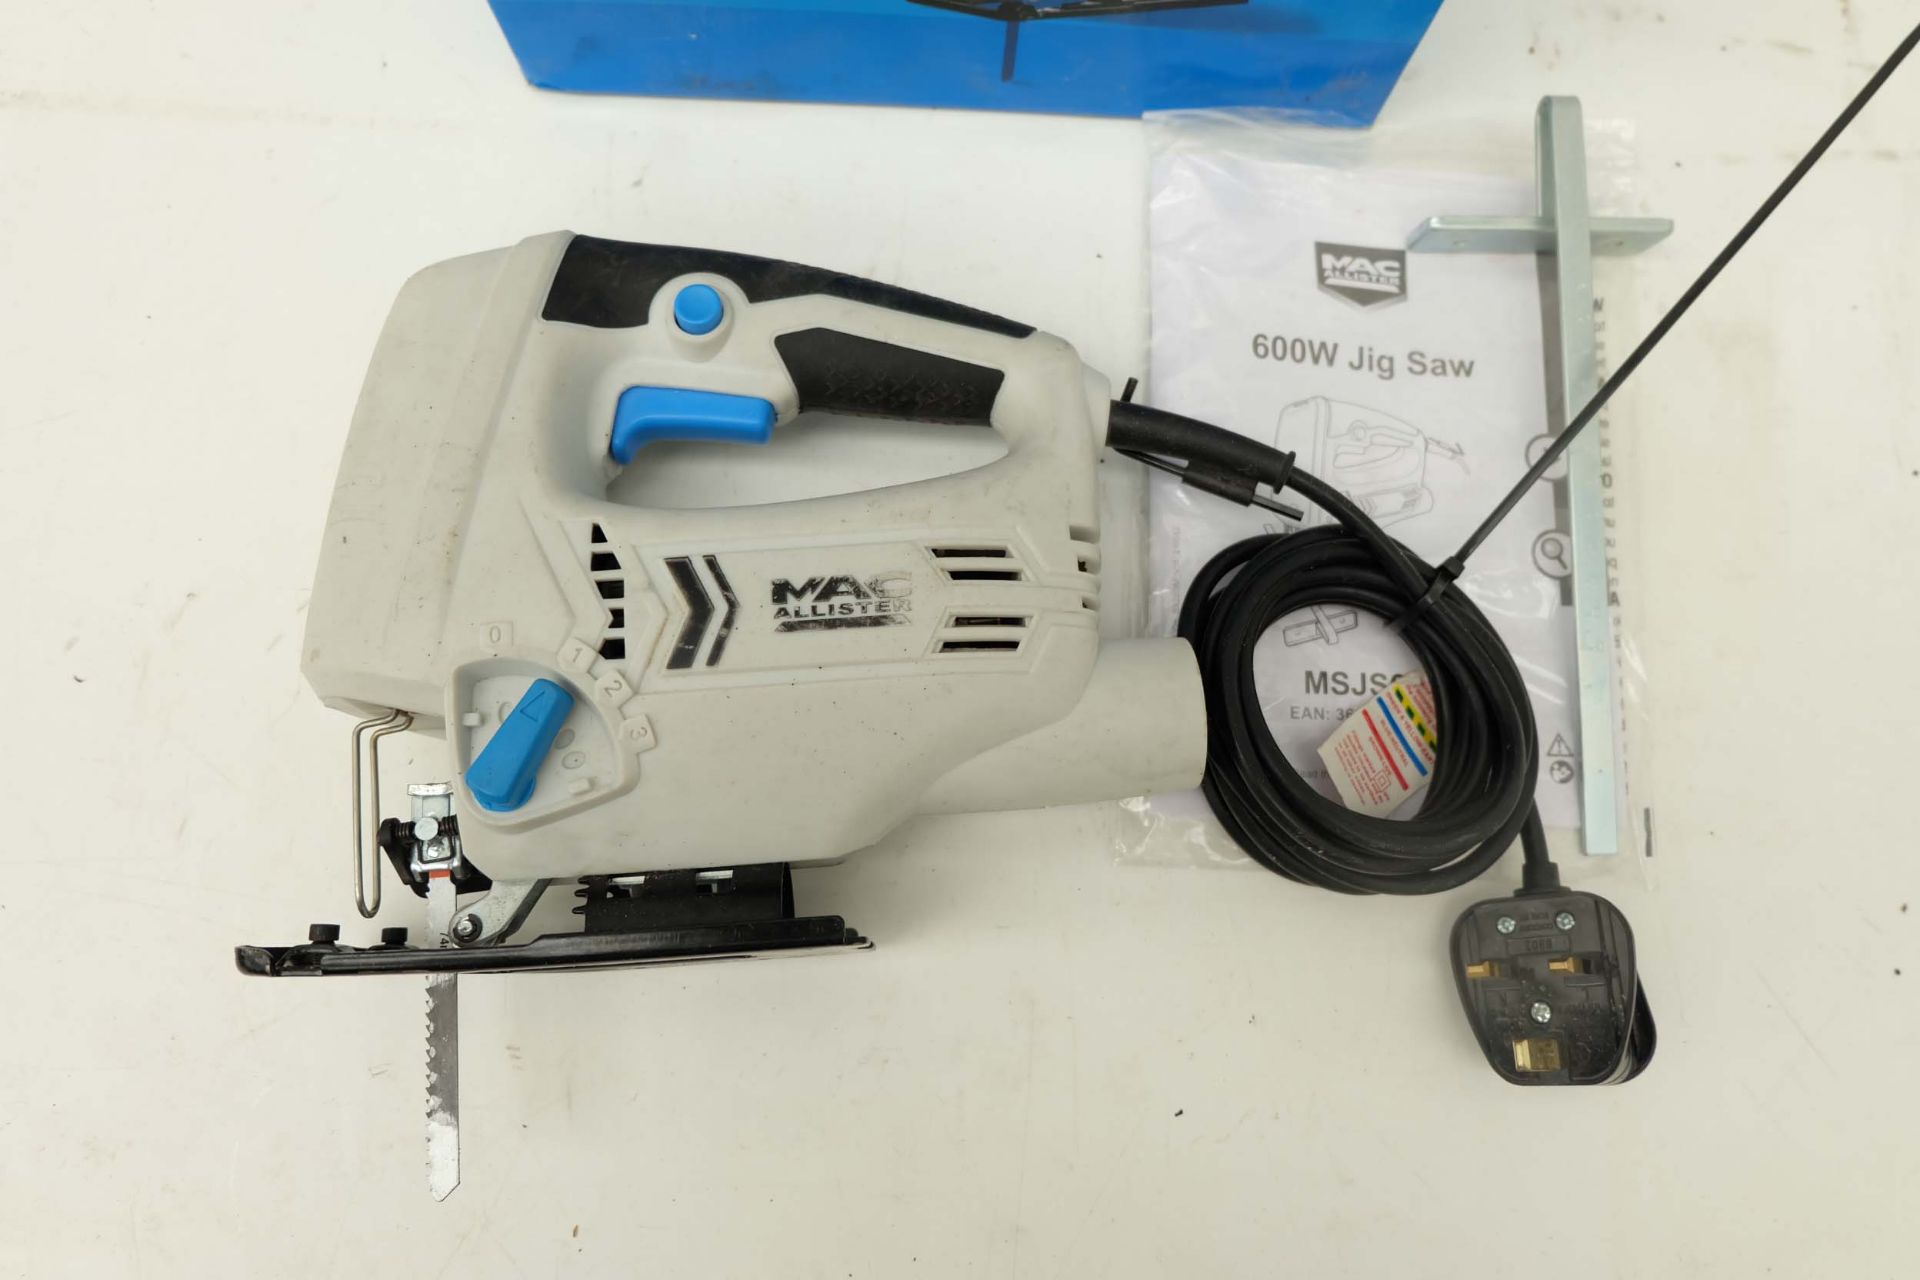 MacAllister MSJS600 Corded Jigsaw. Max Cutting Depth 80mm. Single Phase 600W. With Book and Box.